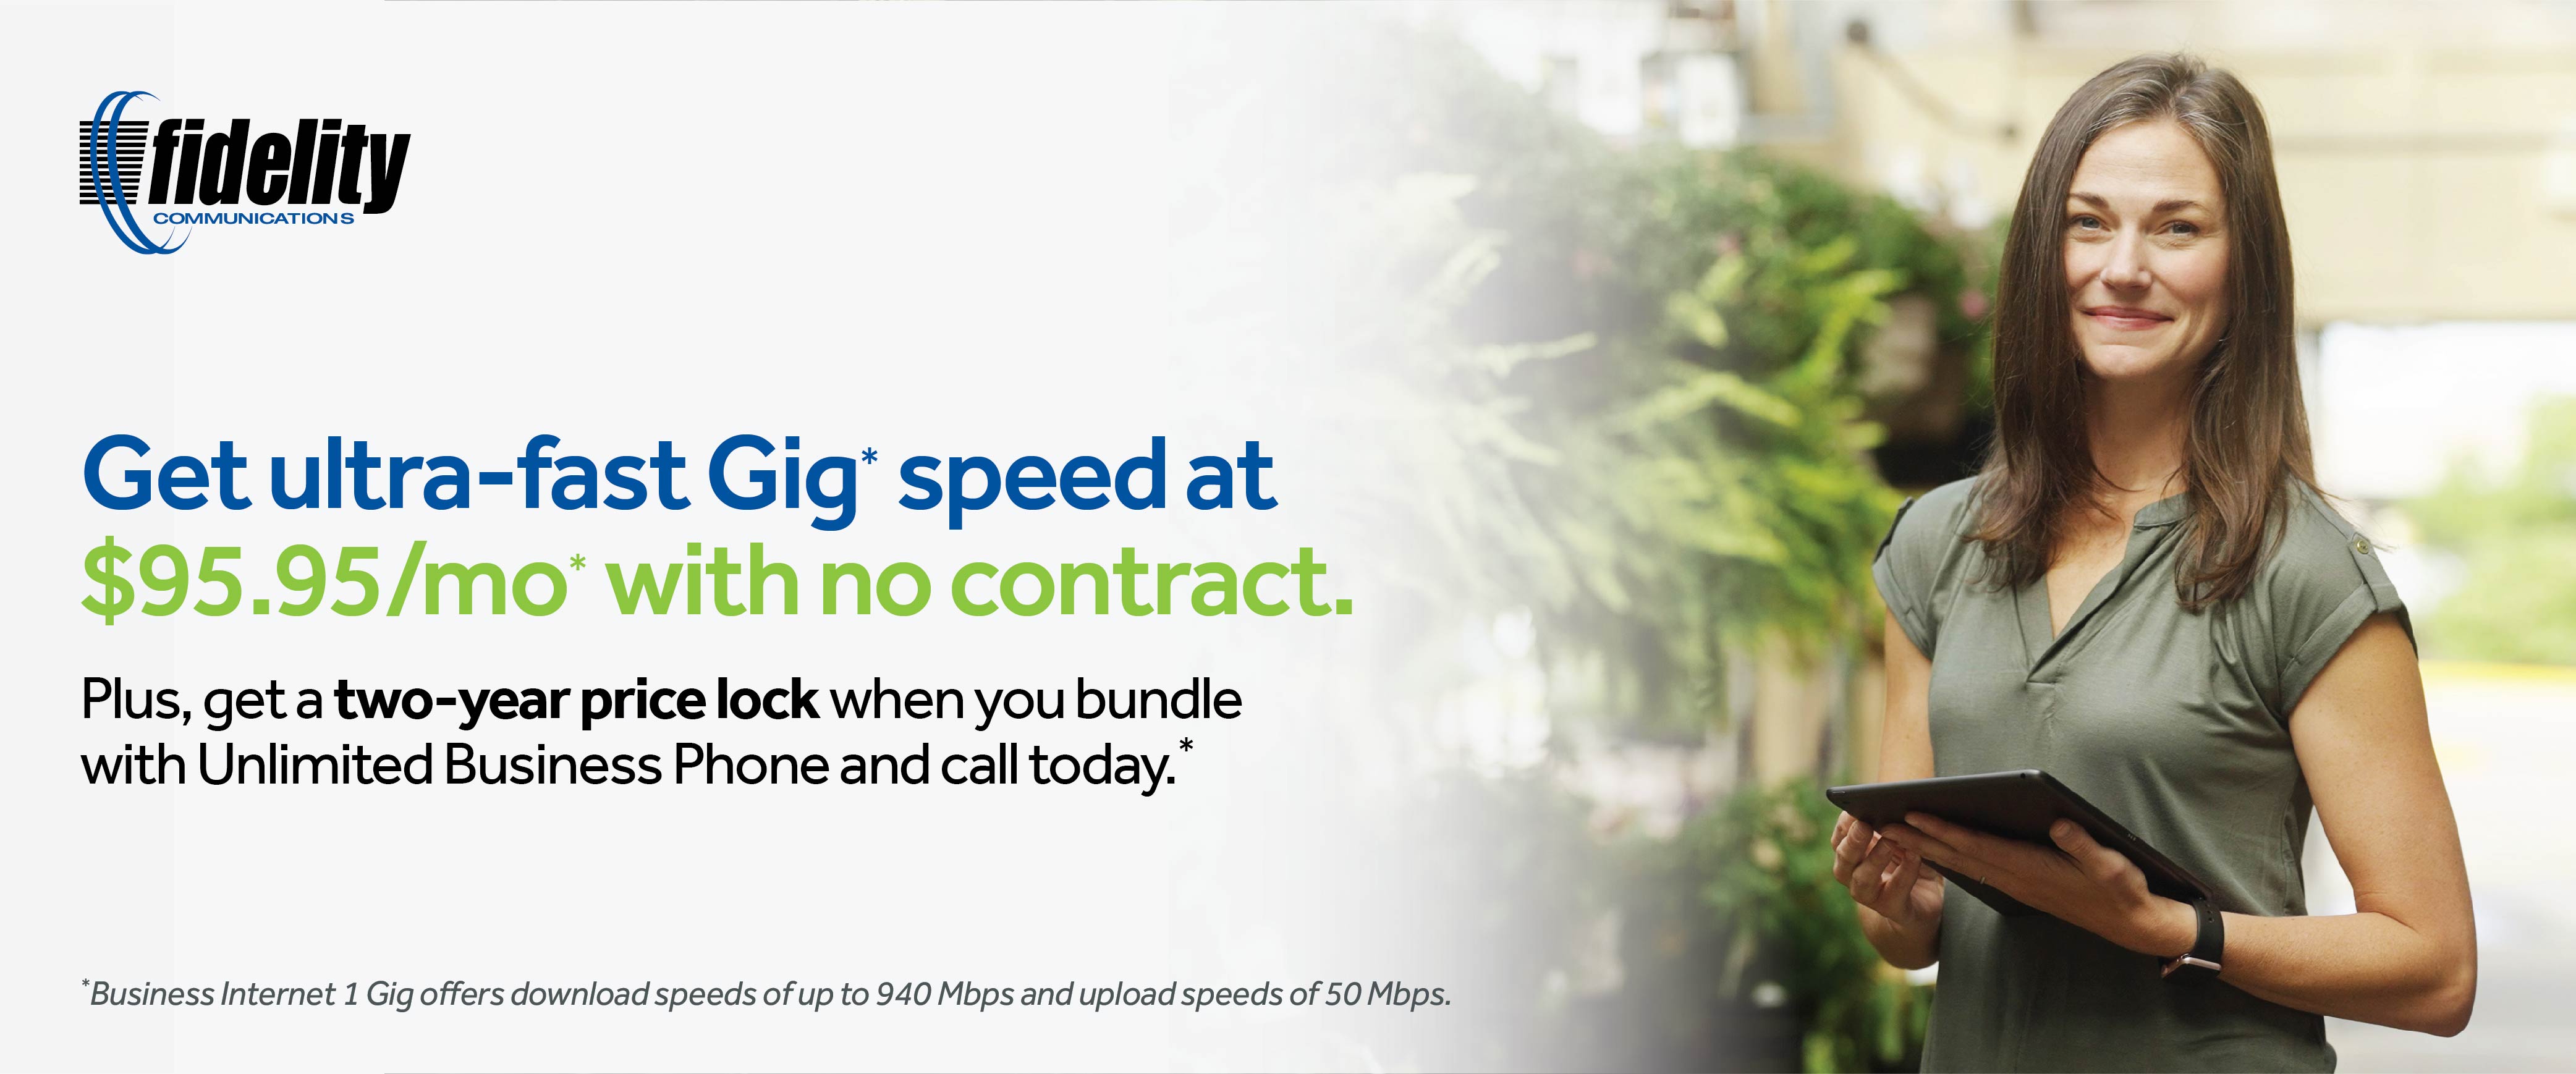 Get ultra-fast Gig * speed at $95.95/mo* with no contract. Plus, get a two-year price lock when you bundle with Unlimited Business Phone and call today. * *Business Internet 1 Gig offers download speeds of up to 940 Mbps and upload speeds of 50 Mbps.